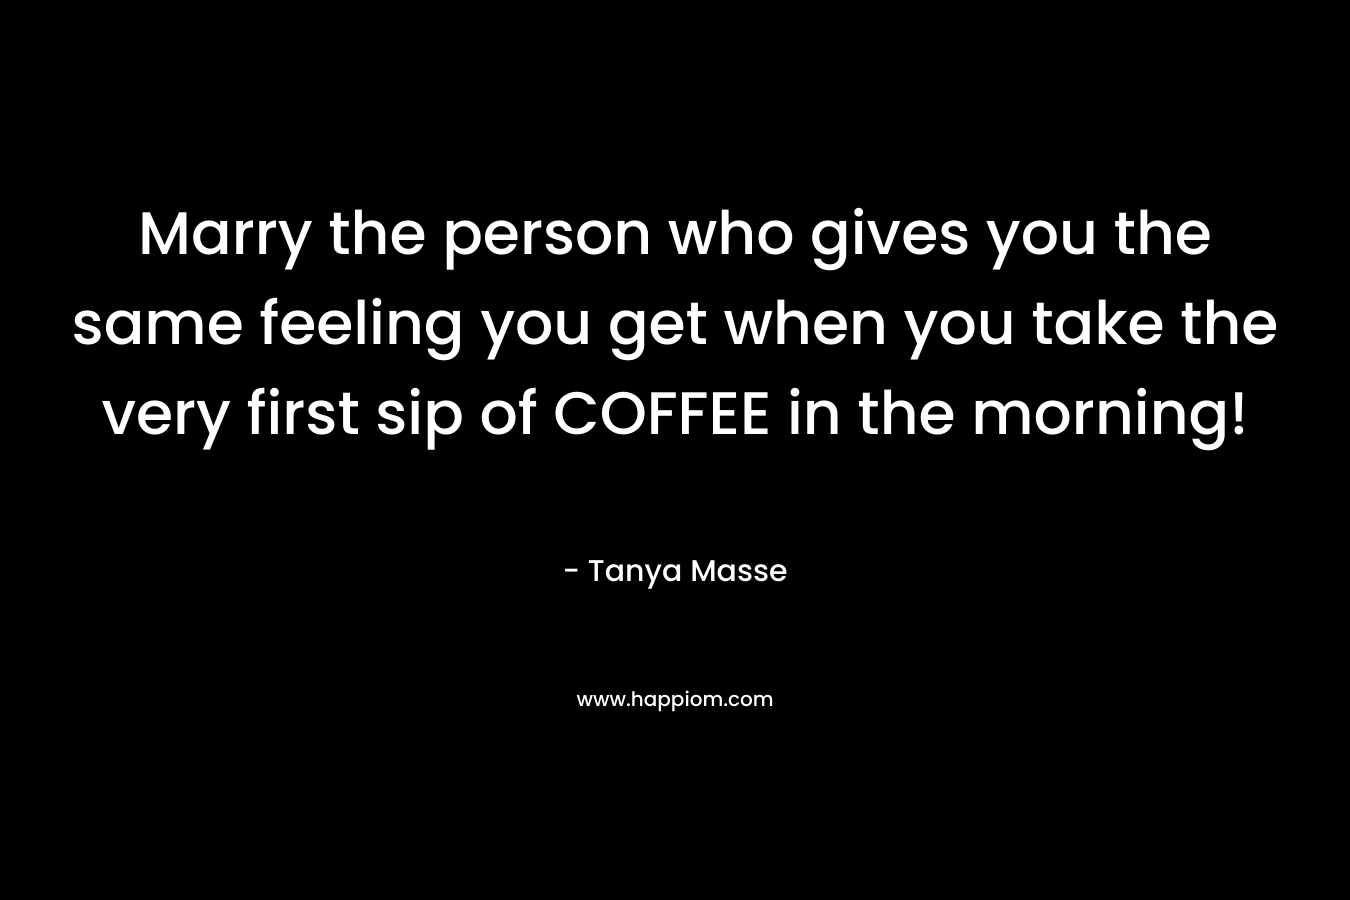 Marry the person who gives you the same feeling you get when you take the very first sip of COFFEE in the morning!